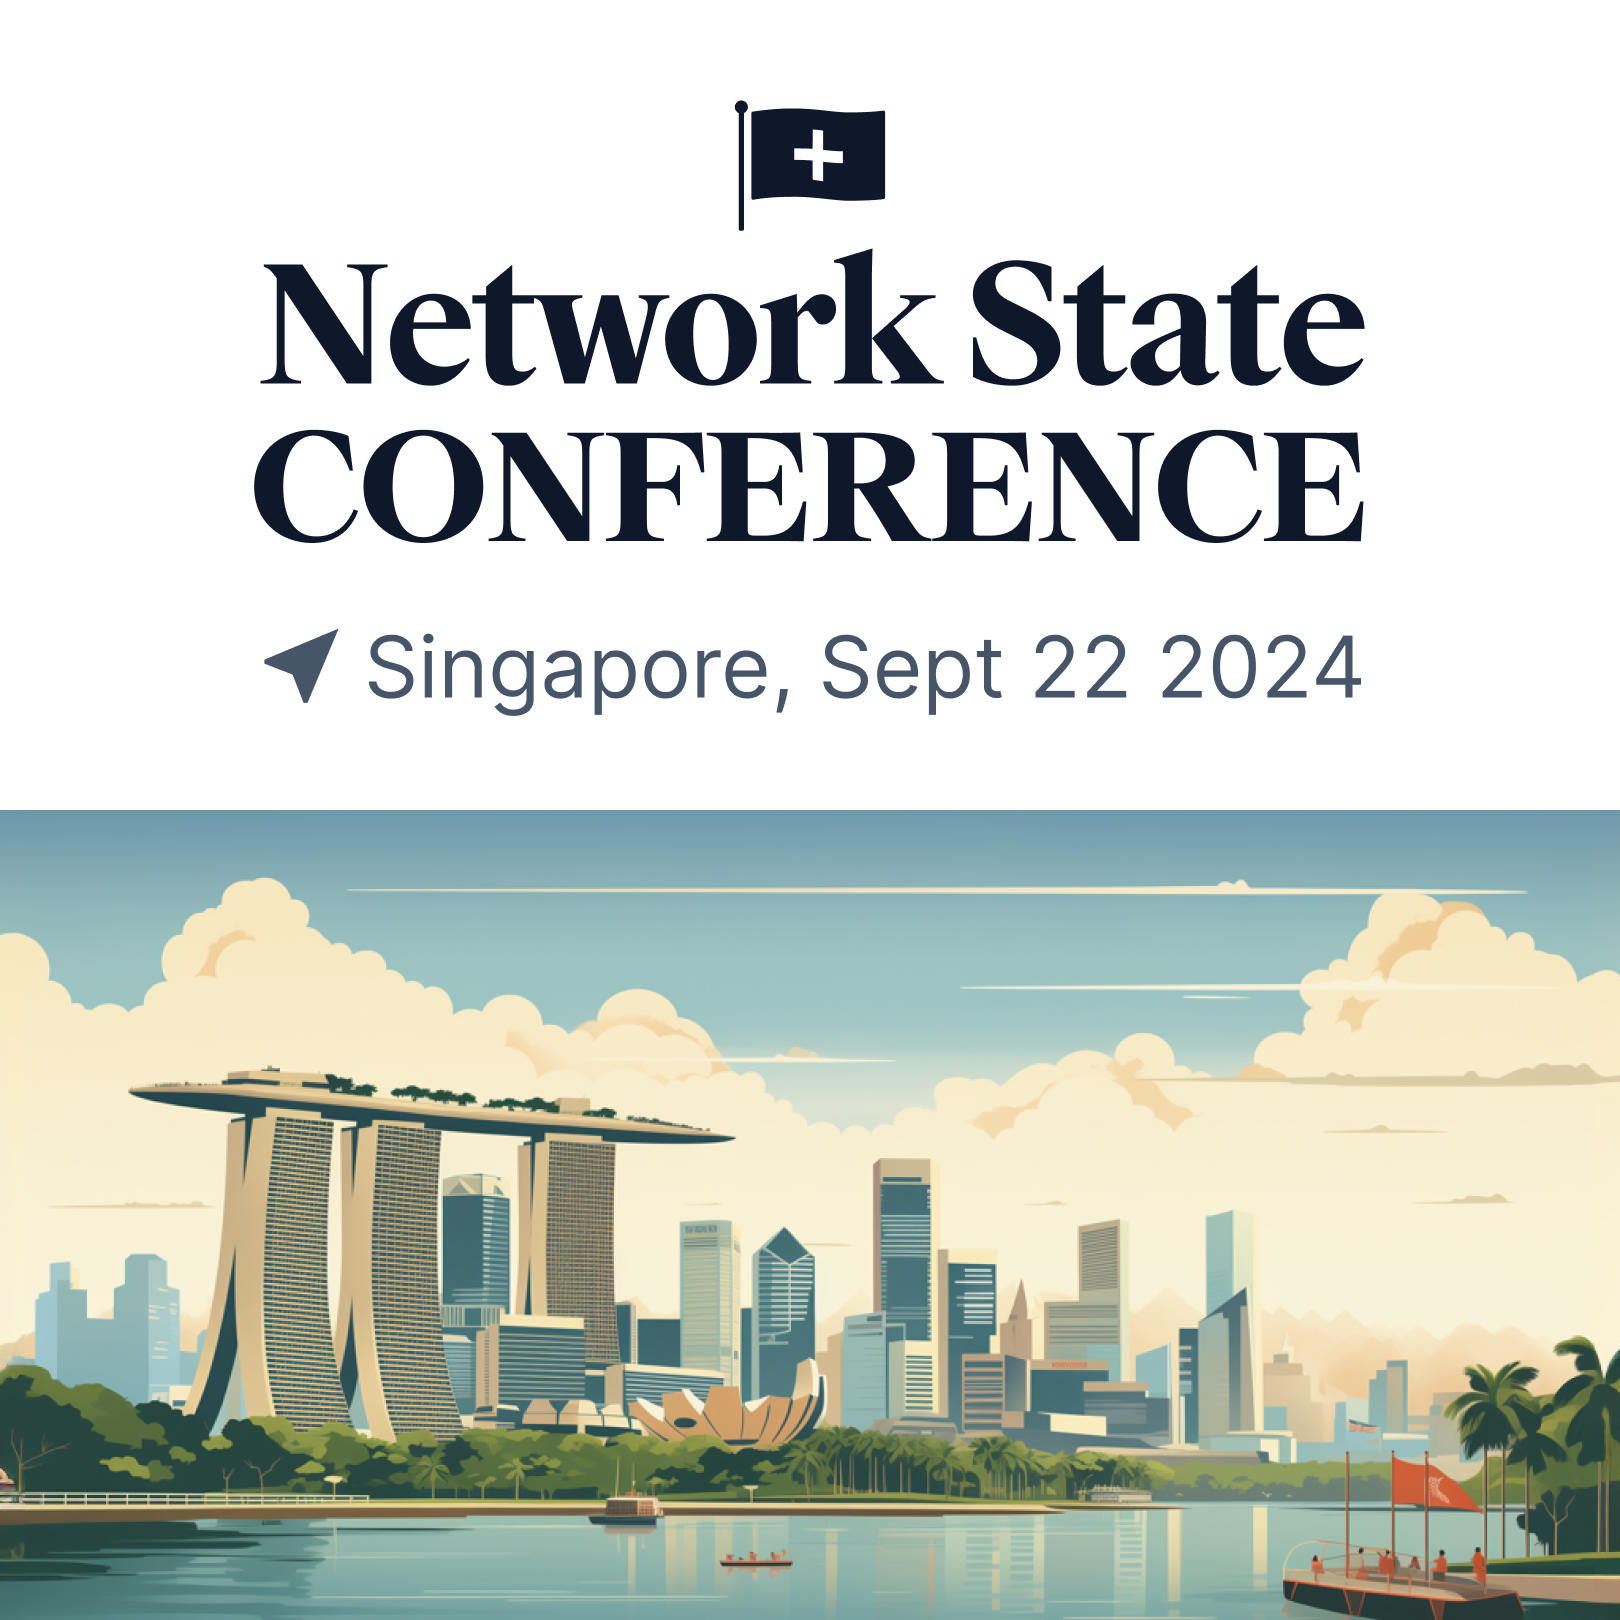 Network State Conference: Singapore Sept 22, 2024